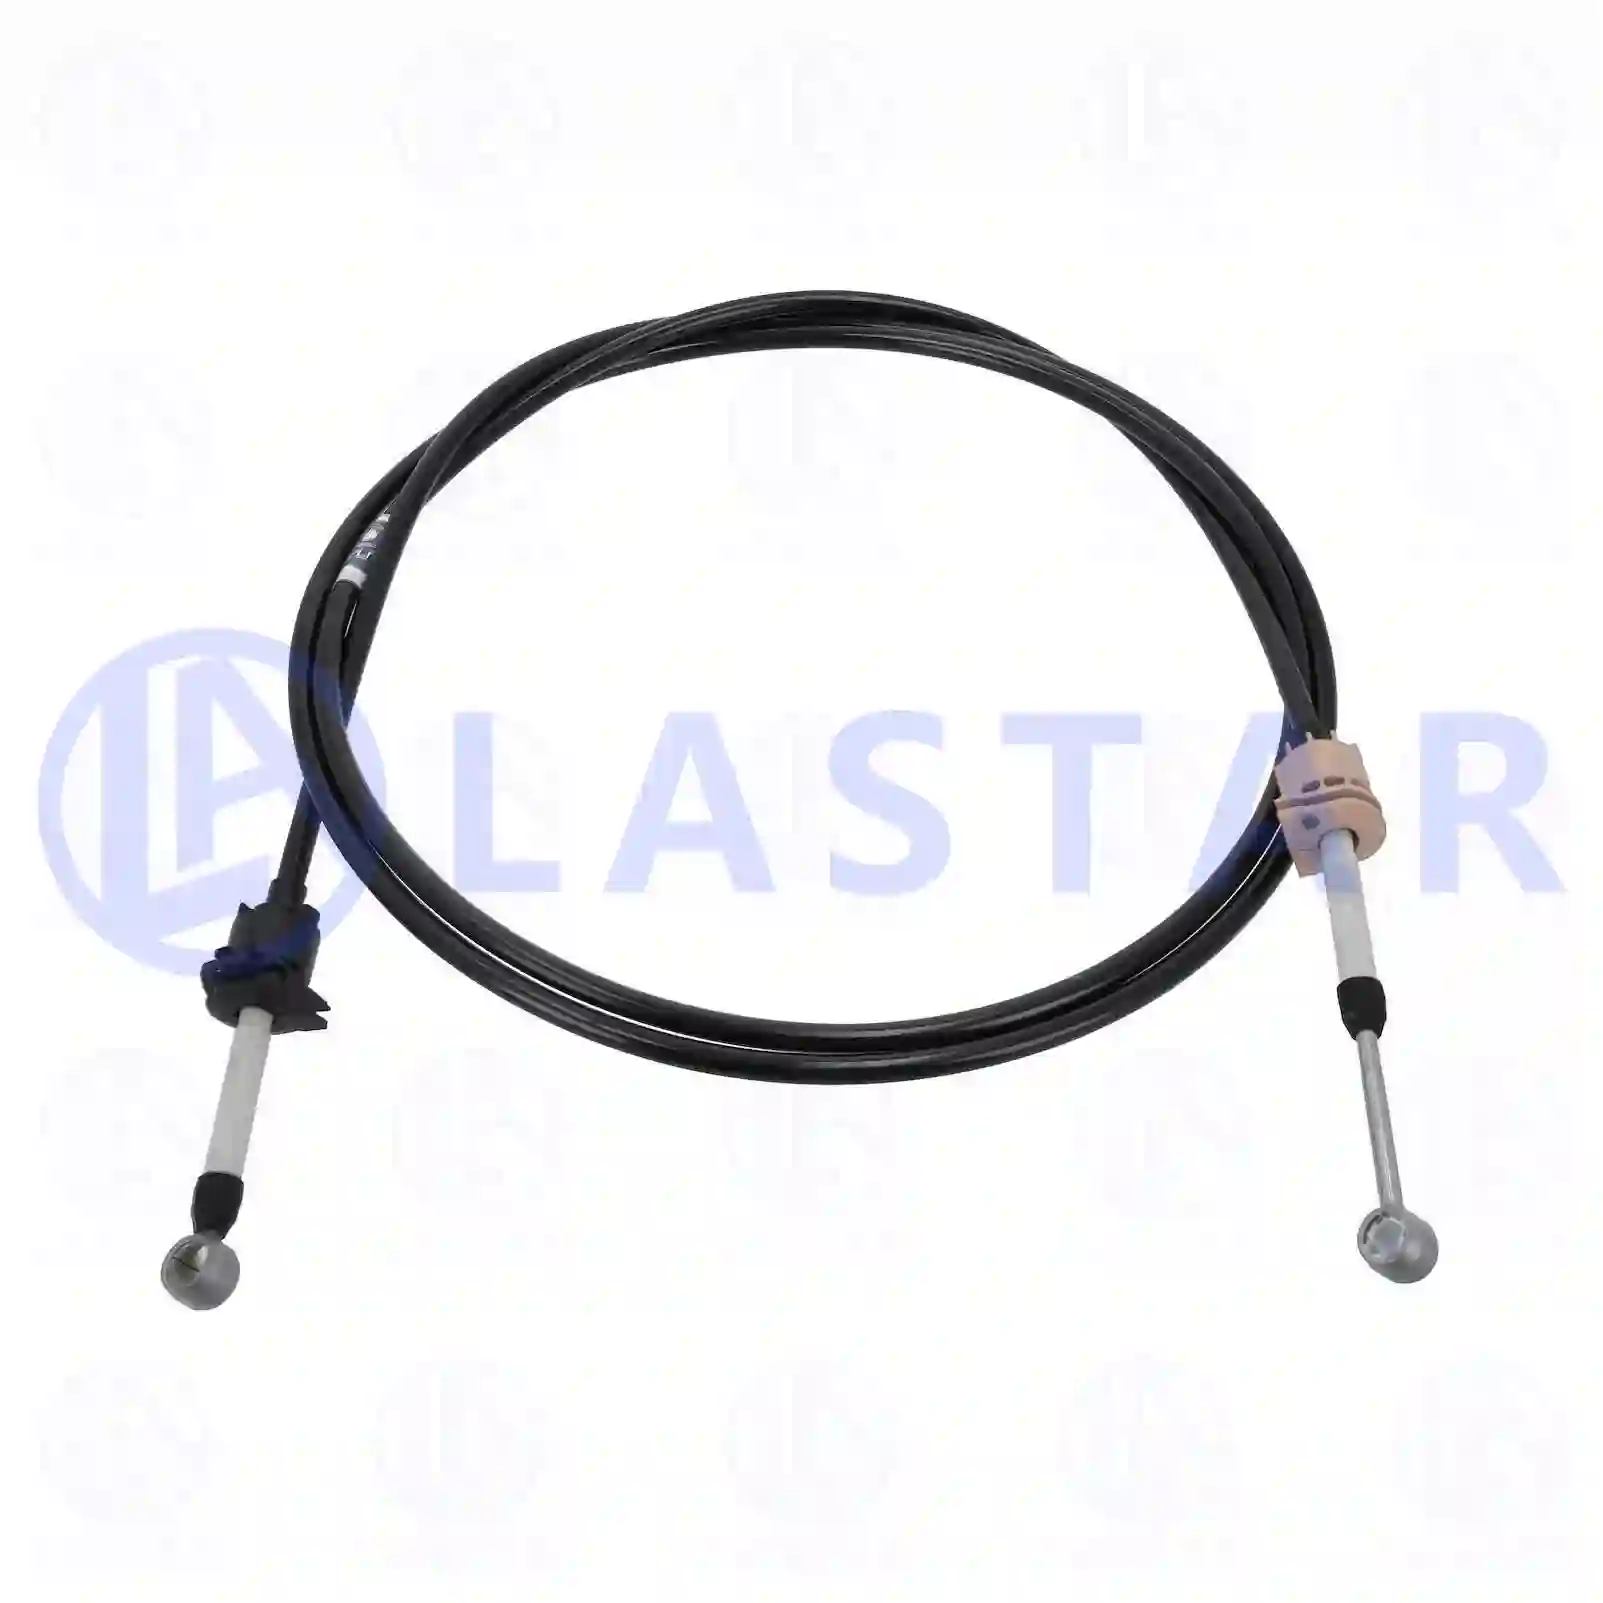 Control cable, switching, 77732685, 20545950, 20702950, 21002850, 21343550, 21789666 ||  77732685 Lastar Spare Part | Truck Spare Parts, Auotomotive Spare Parts Control cable, switching, 77732685, 20545950, 20702950, 21002850, 21343550, 21789666 ||  77732685 Lastar Spare Part | Truck Spare Parts, Auotomotive Spare Parts